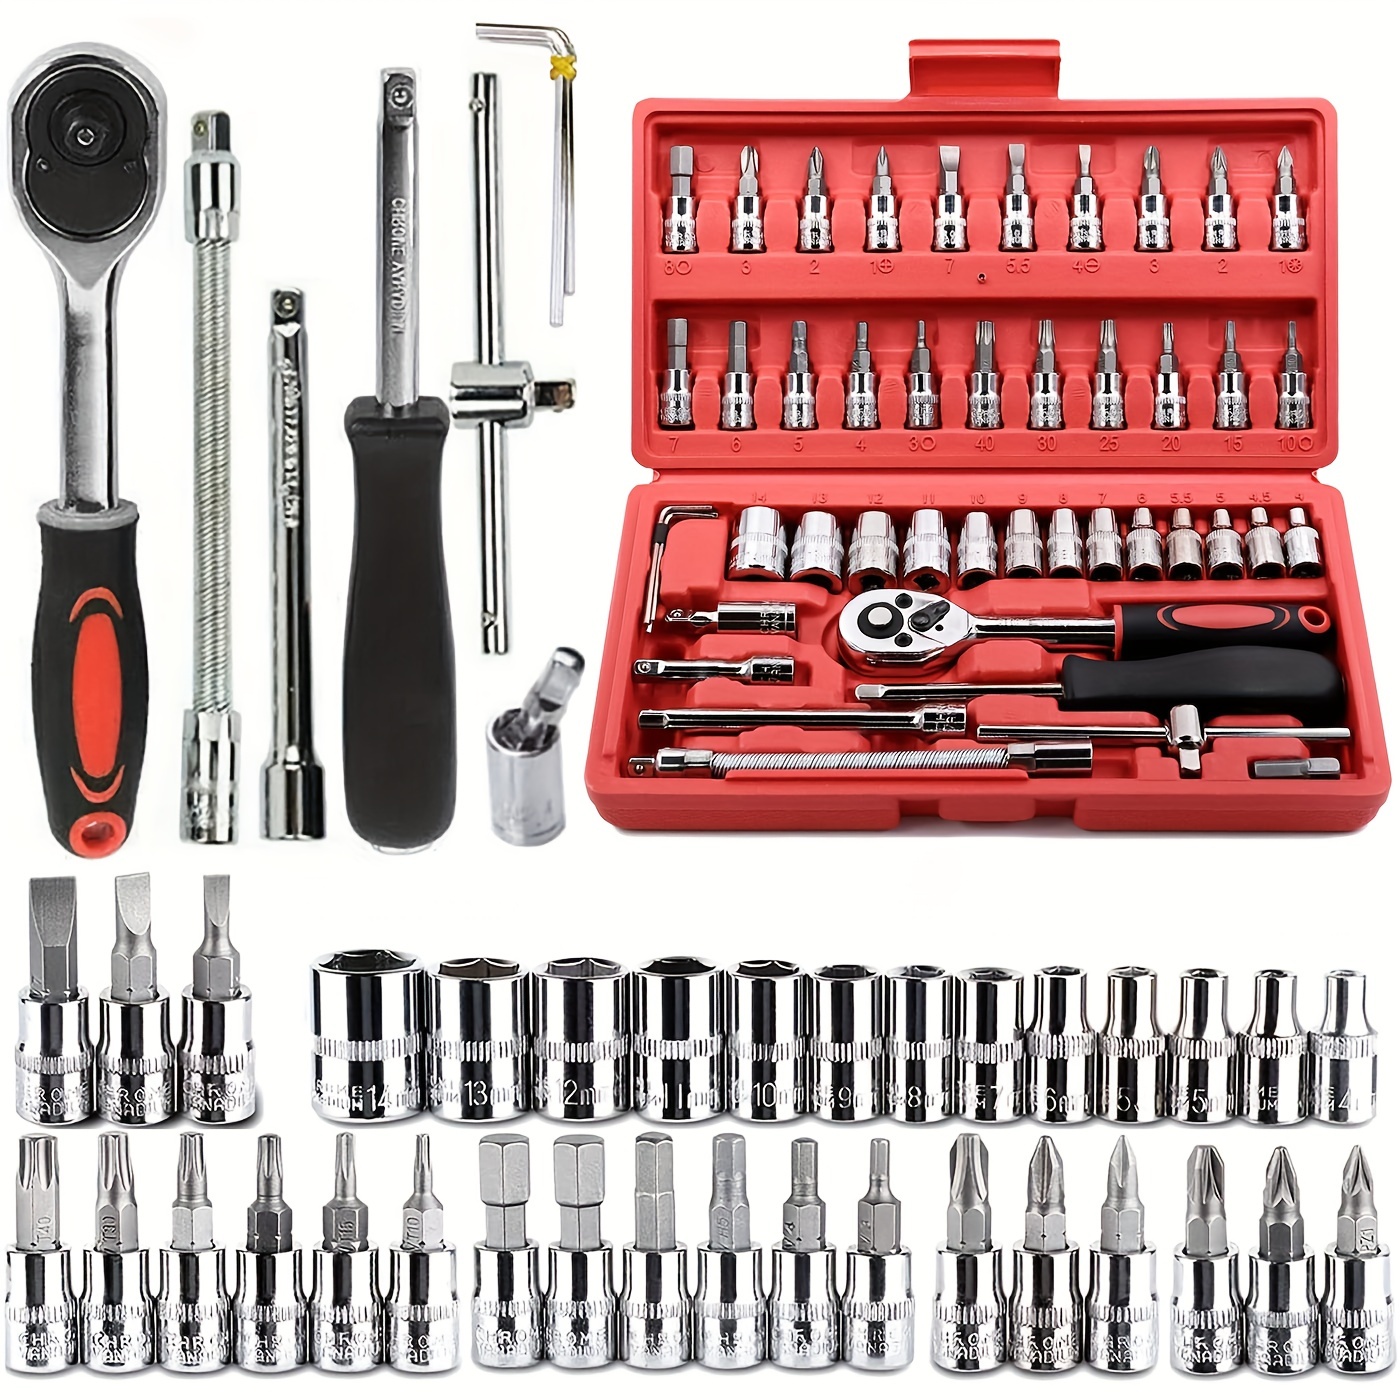 46pcs 1/4 Inch Drive Socket Ratchet Wrench Set, With Bit Socket Set Metric  And Extension Bar For Auto Repairing And Household, With Storage Case